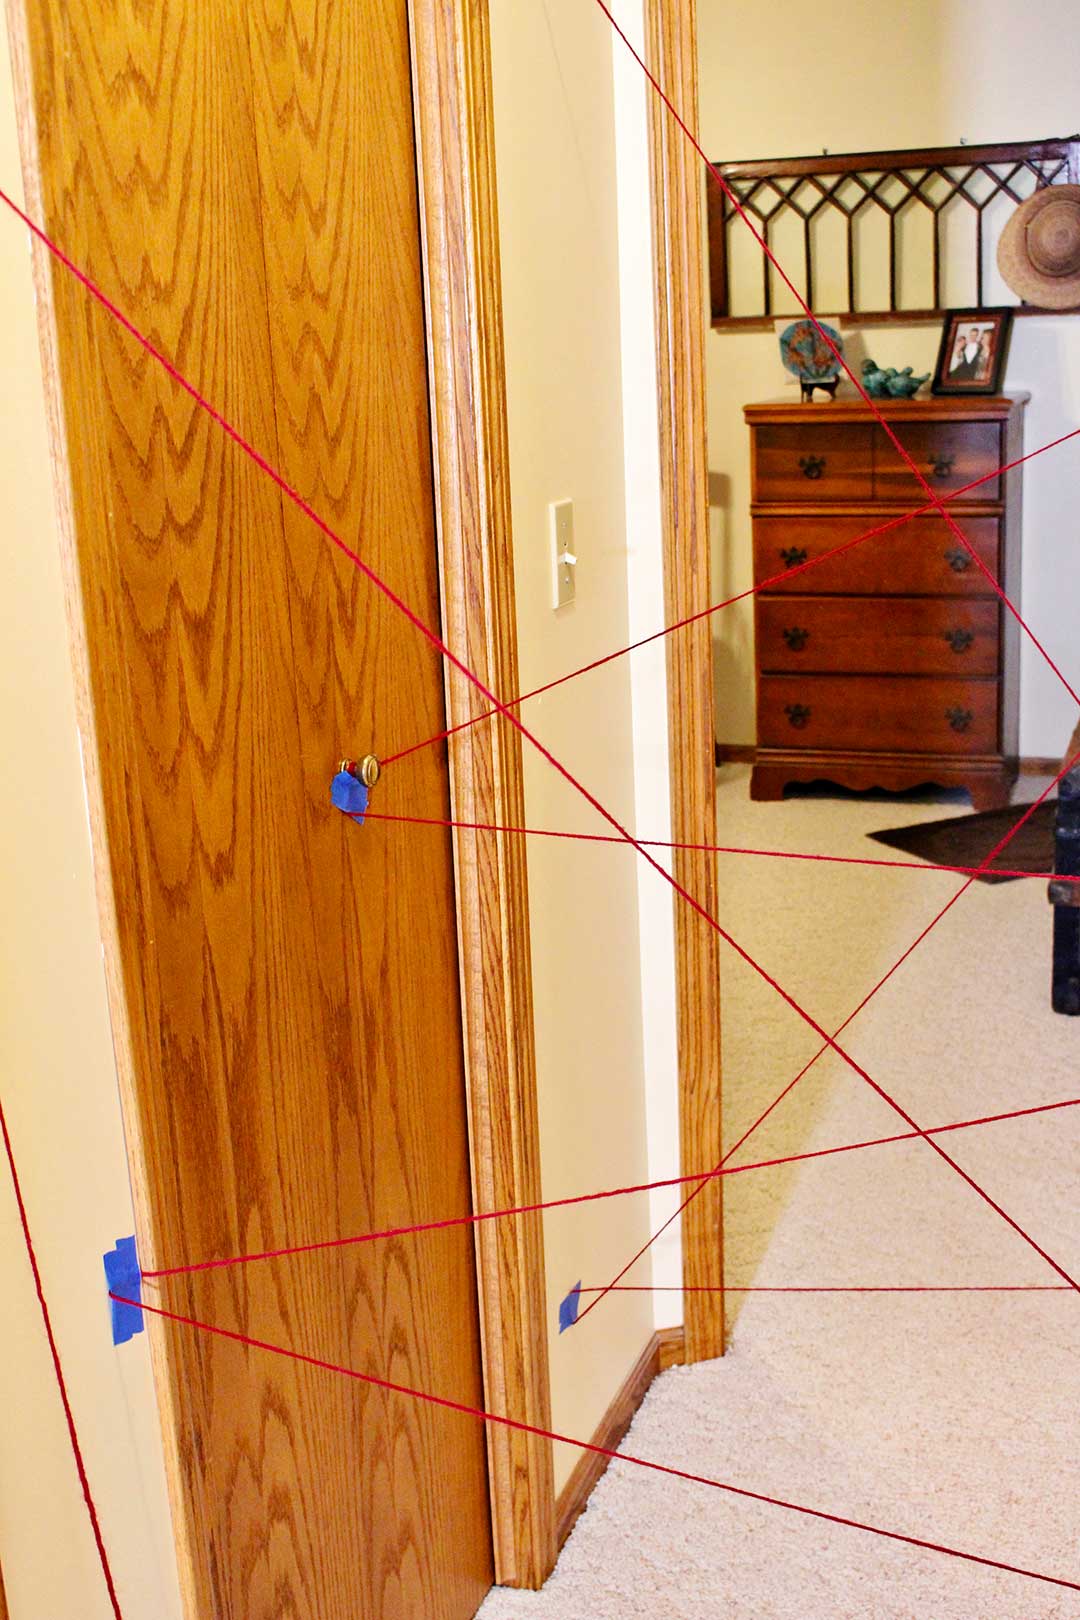 Red yarn taped to a closet door in a hallway in a yarn maze with a view of a bedroom with dresser and wall hanging.